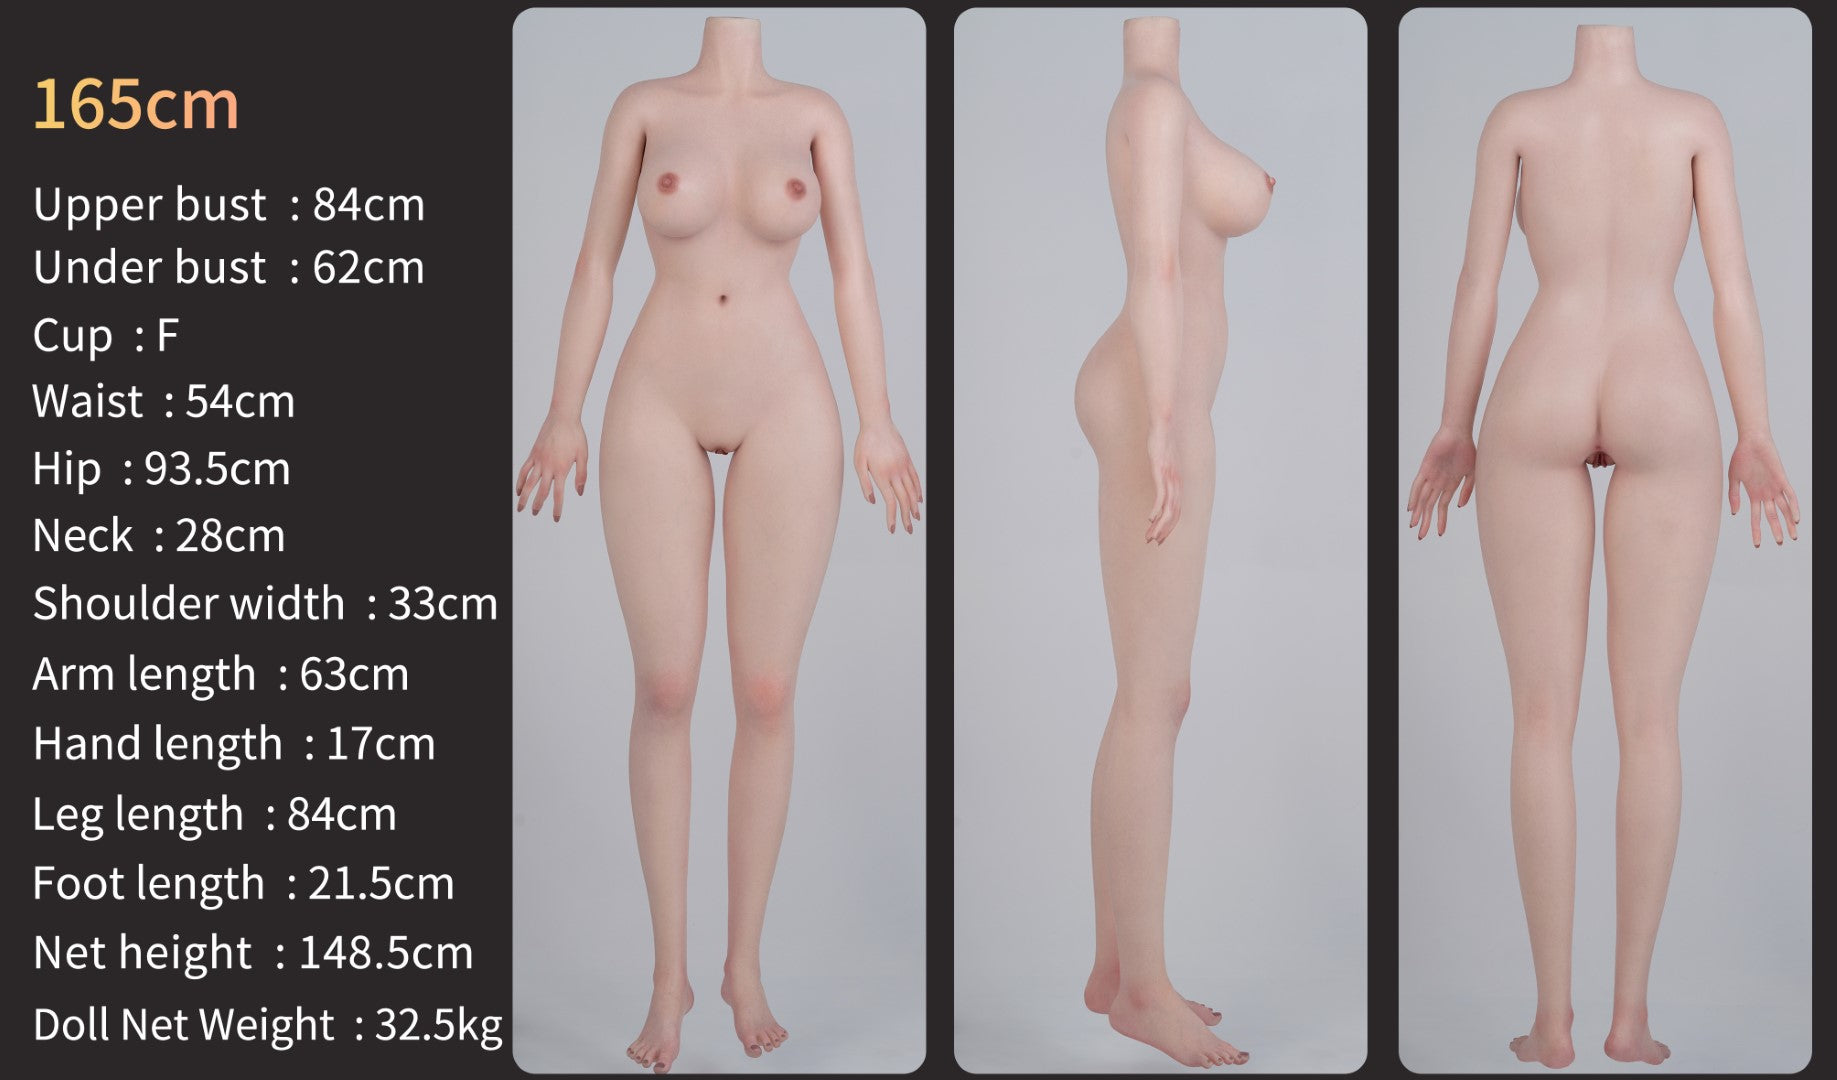 Zelex Sex Doll 165 cm - Silicone real doll. Docklandet - Up to 60% sale on top quality sex dolls. Buy your sex doll today, express delivery to the entire Nordic region and also pick up in Borlänge. Sex dolls also called real dolls. Sweden's largest selection and best prices with thousands of satisfied customers!